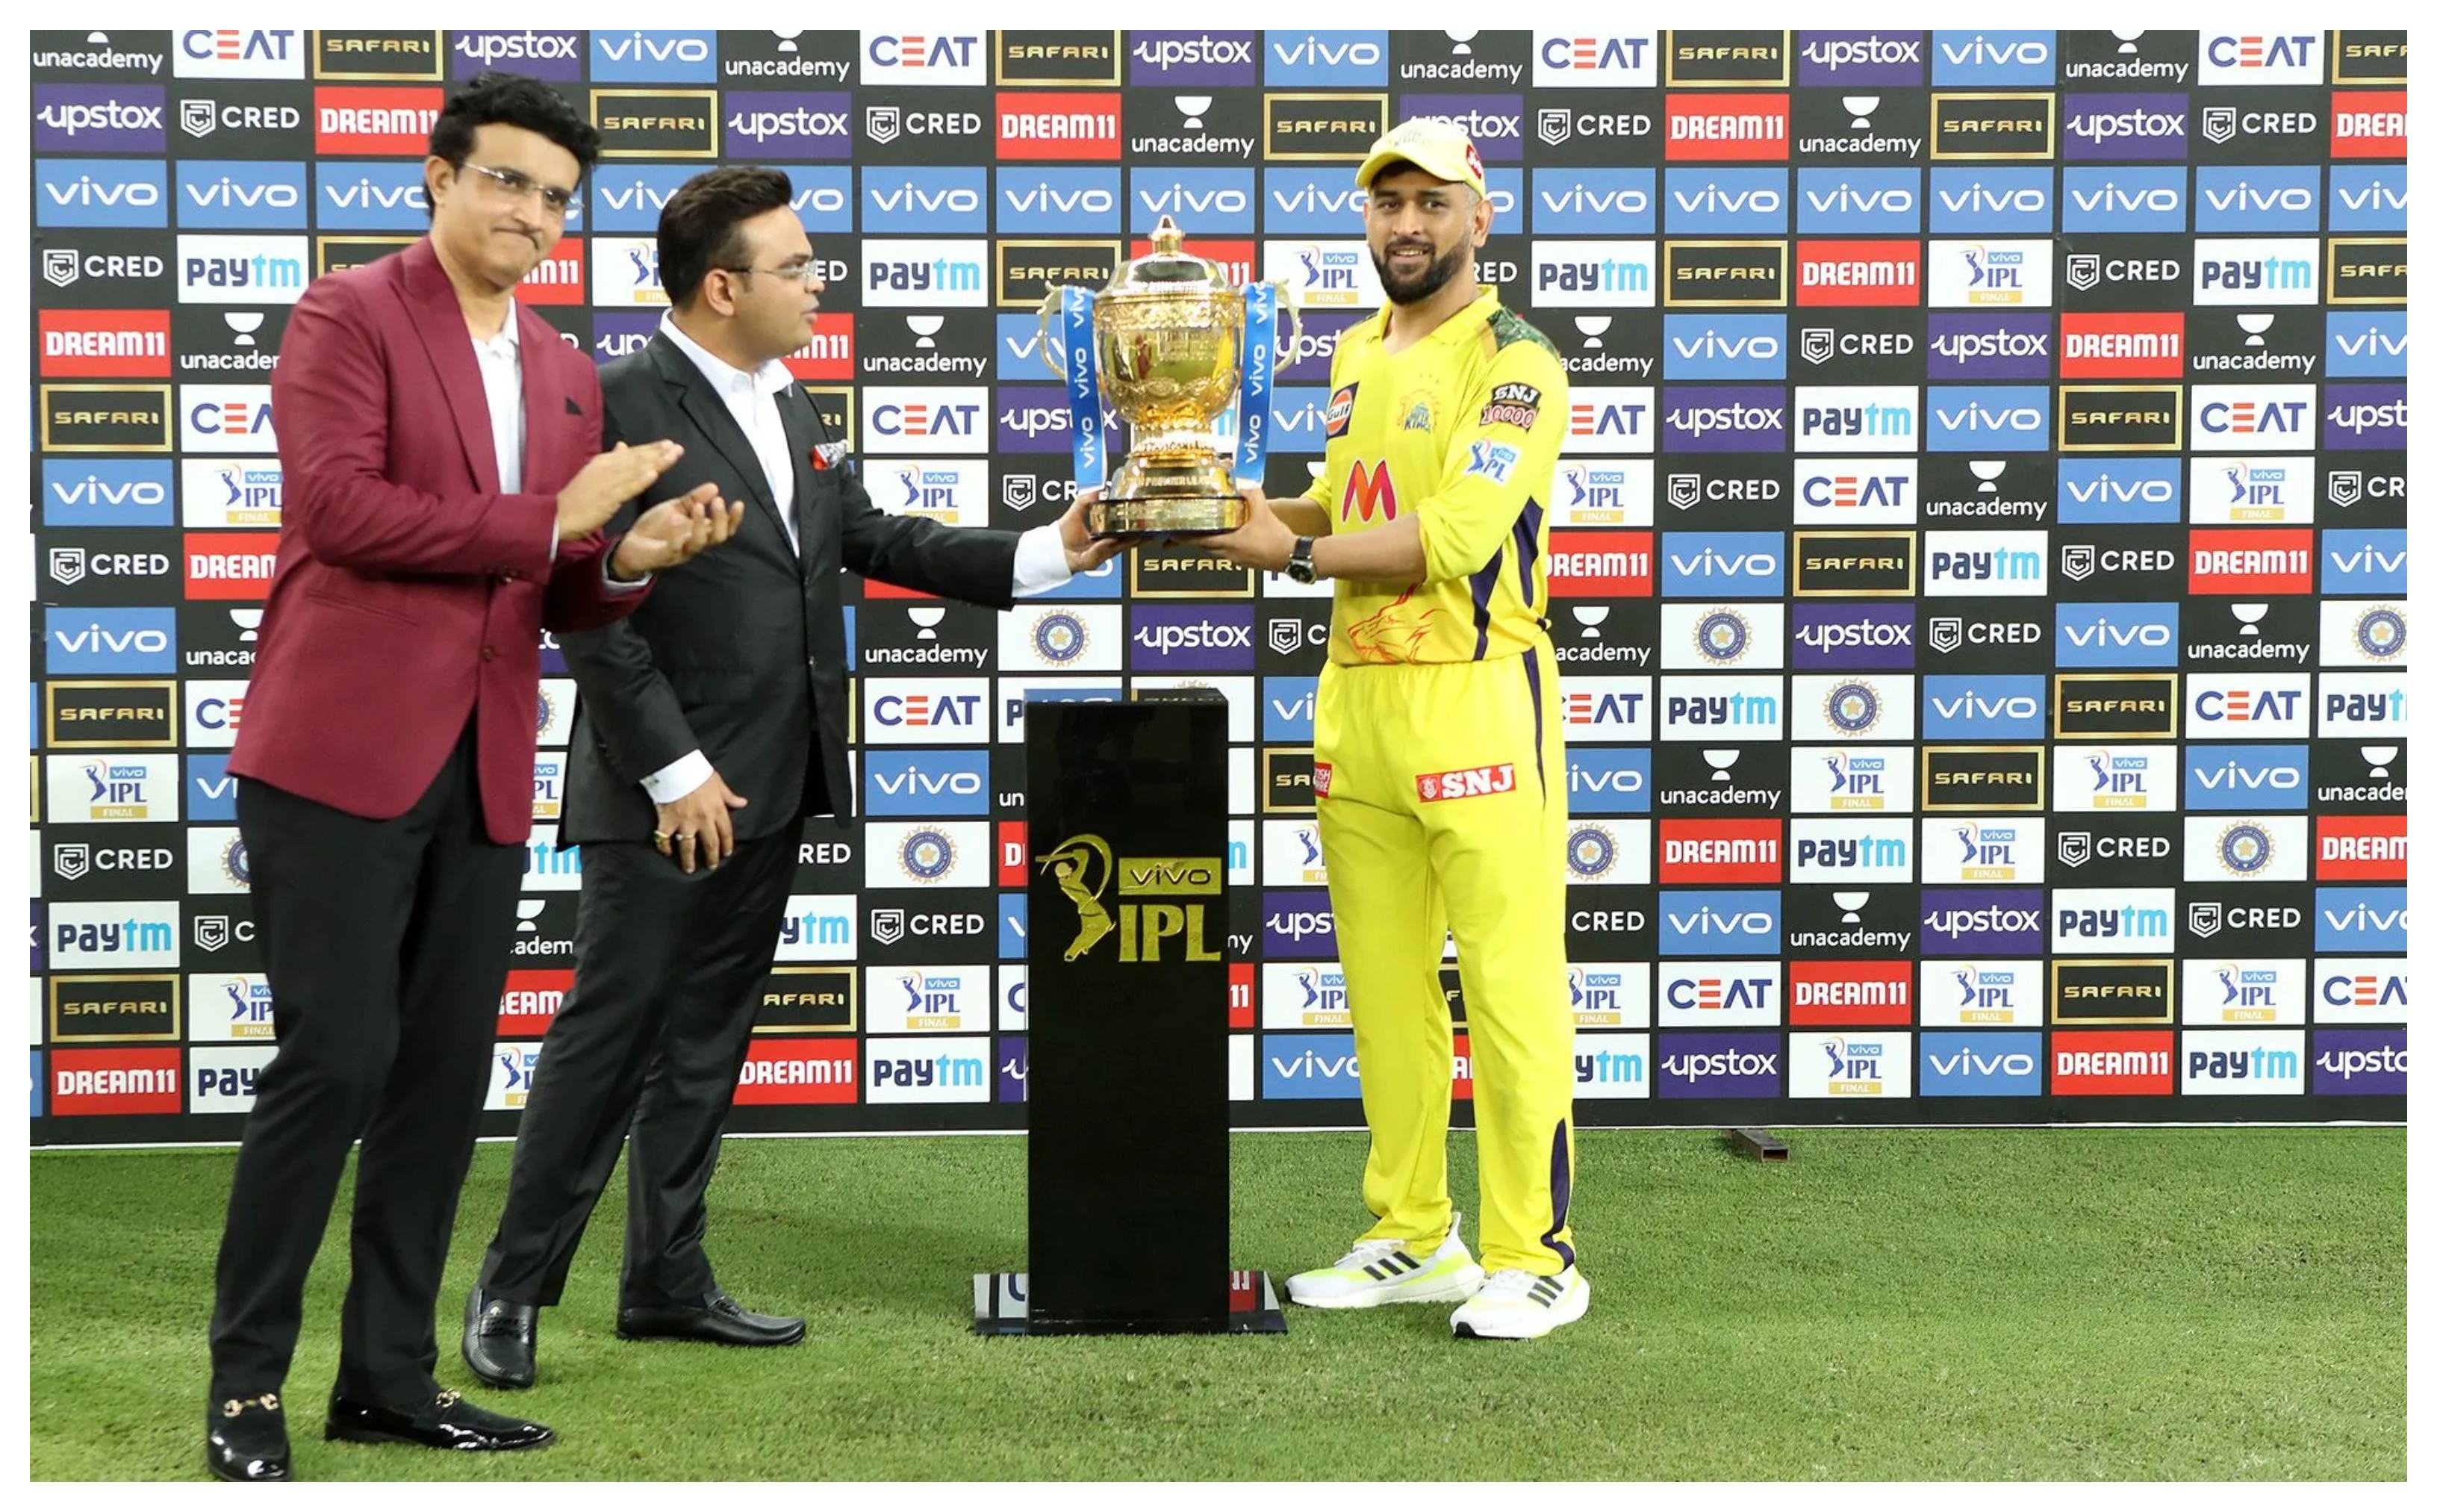 Sourav Ganguly and Jay Shah handing over the IPL 2021 trophy to MS Dhoni | BCCI/IPL